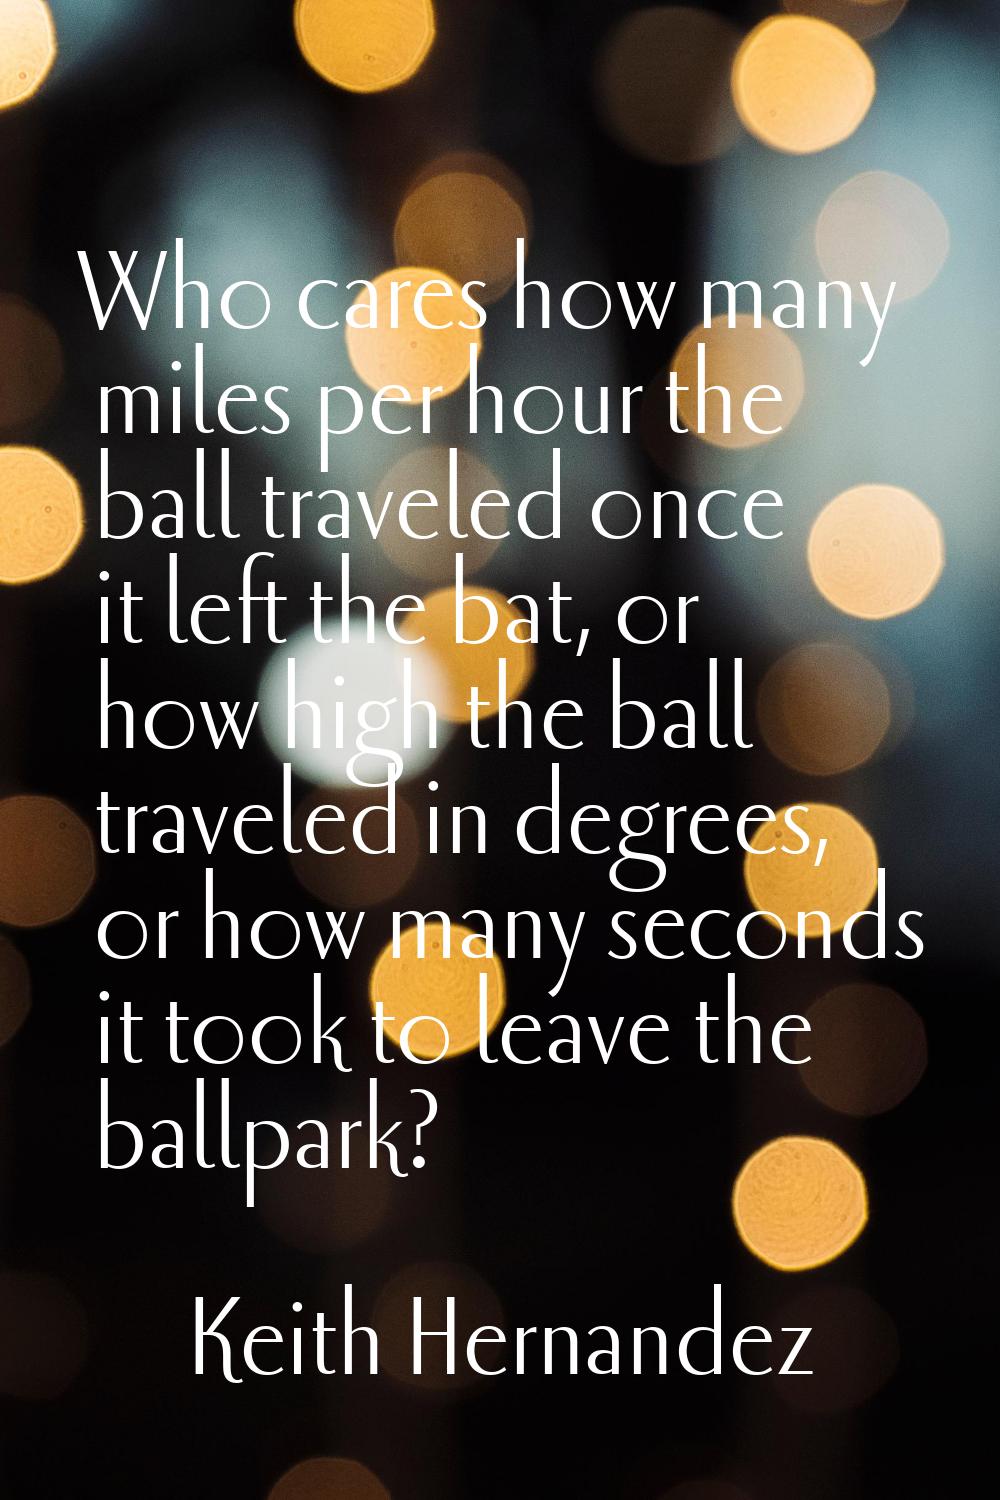 Who cares how many miles per hour the ball traveled once it left the bat, or how high the ball trav